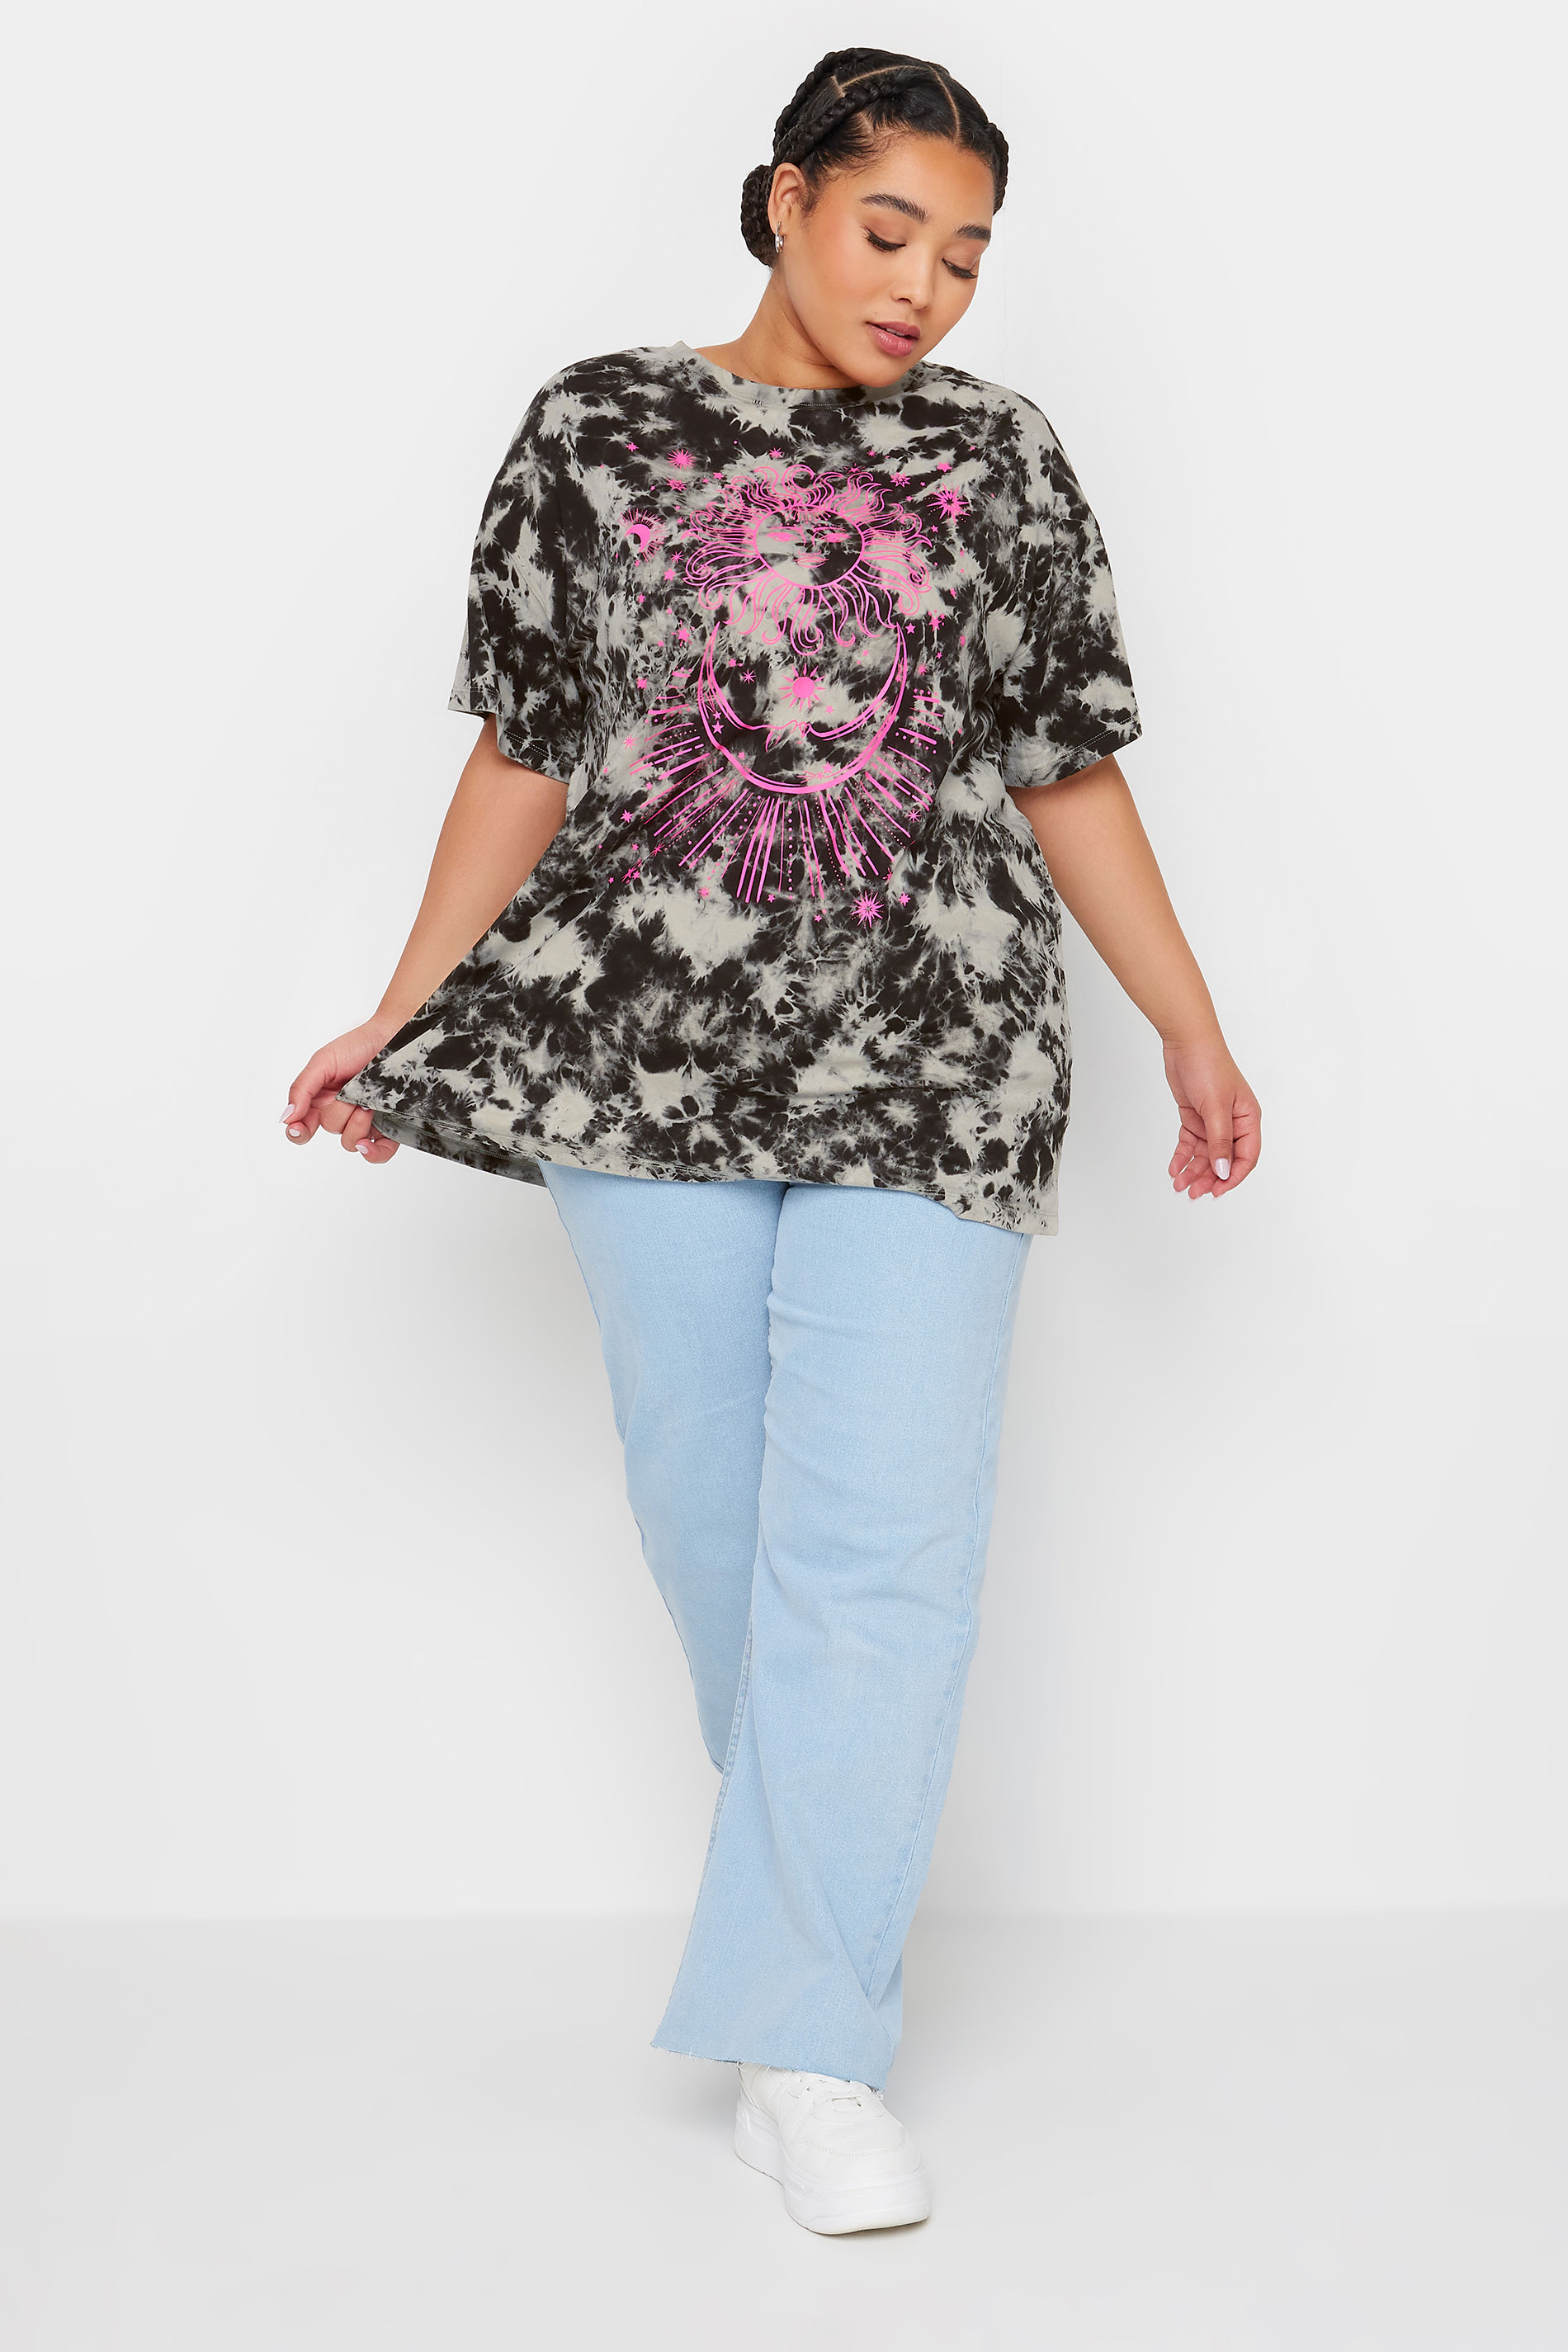 YOURS Plus Size Black Astrology Print Tie Dye T-Shirt | Yours Clothing 2